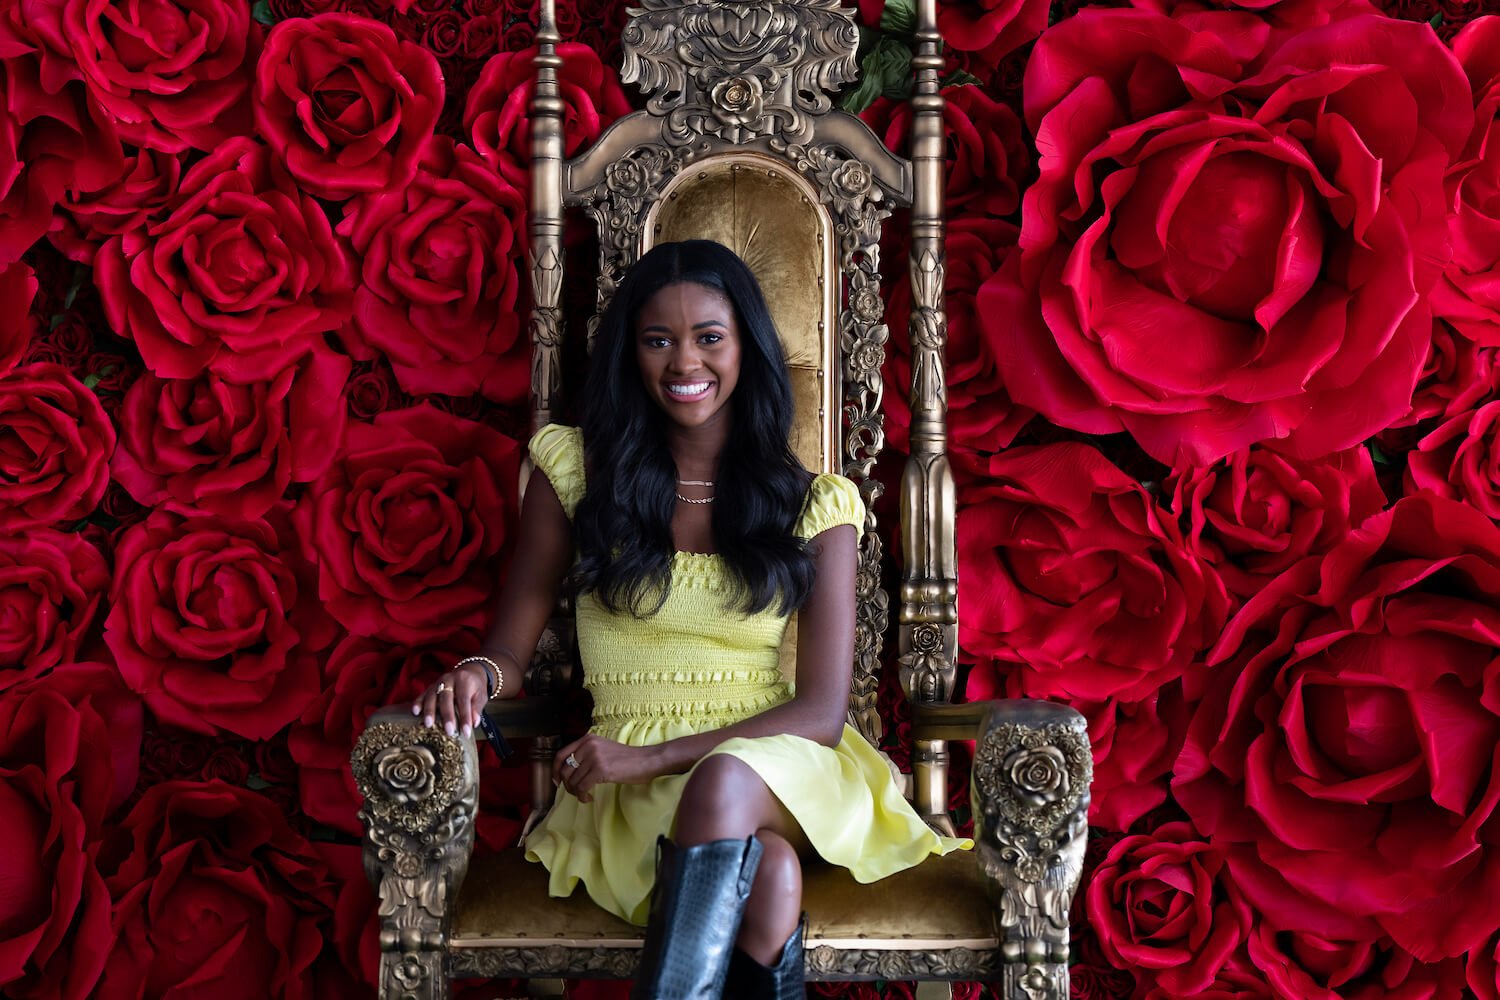 'The Bachelorette' 2023 star Charity Lawson sitting in a throne against a red rose background